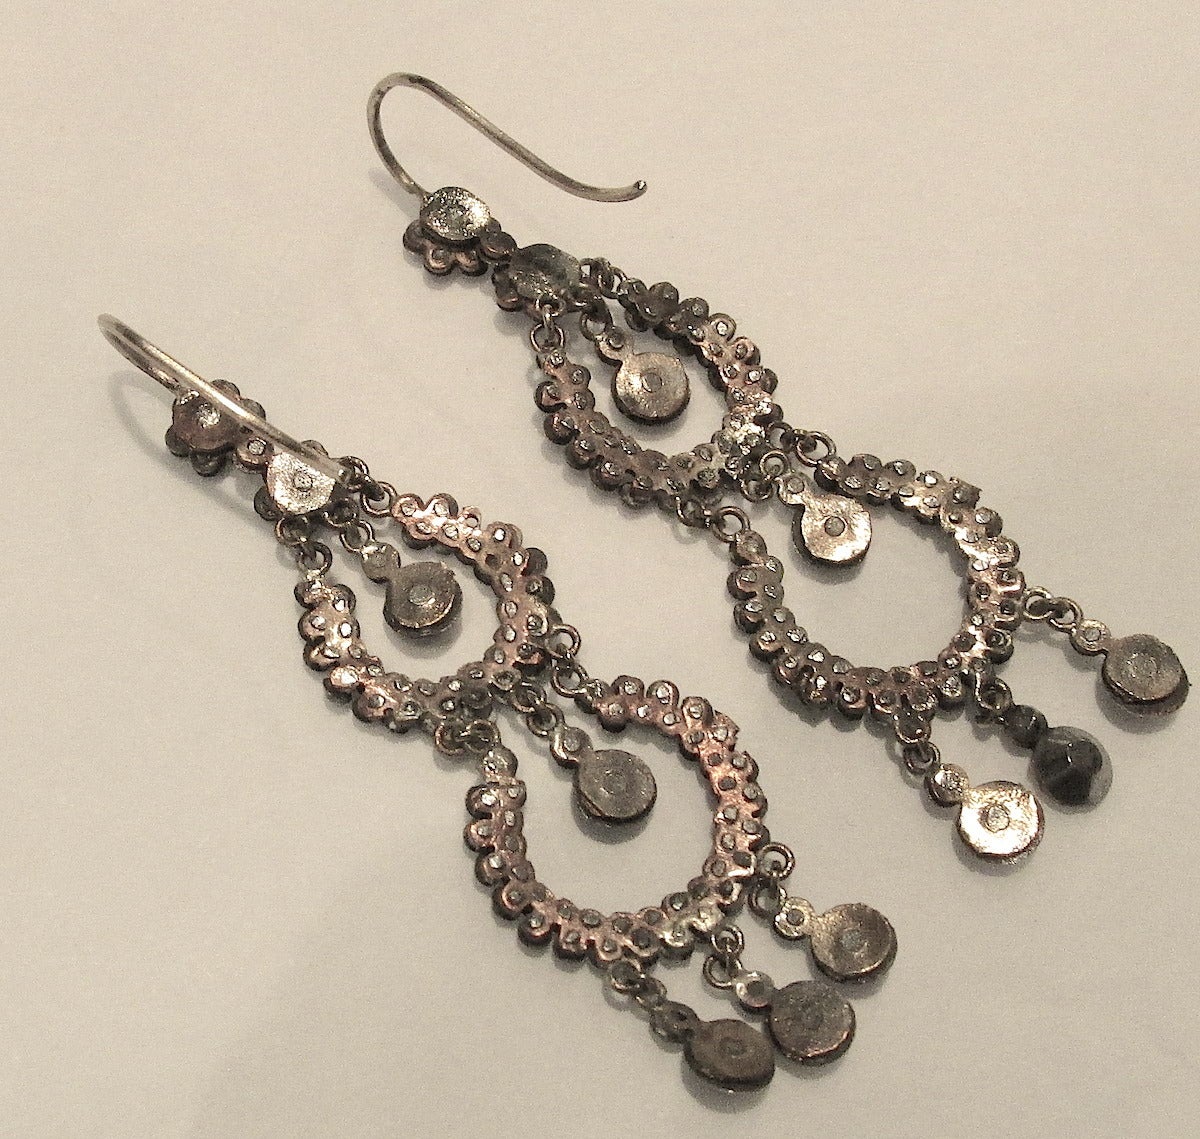 Sparkling Victorian cut steel earrings with two circles and five drops. Their movement will glitter and glisten with every movement. Fun to wear day or night.  The earrings measure 2" long and 5/8" at their widest. Cut steel jewelry is